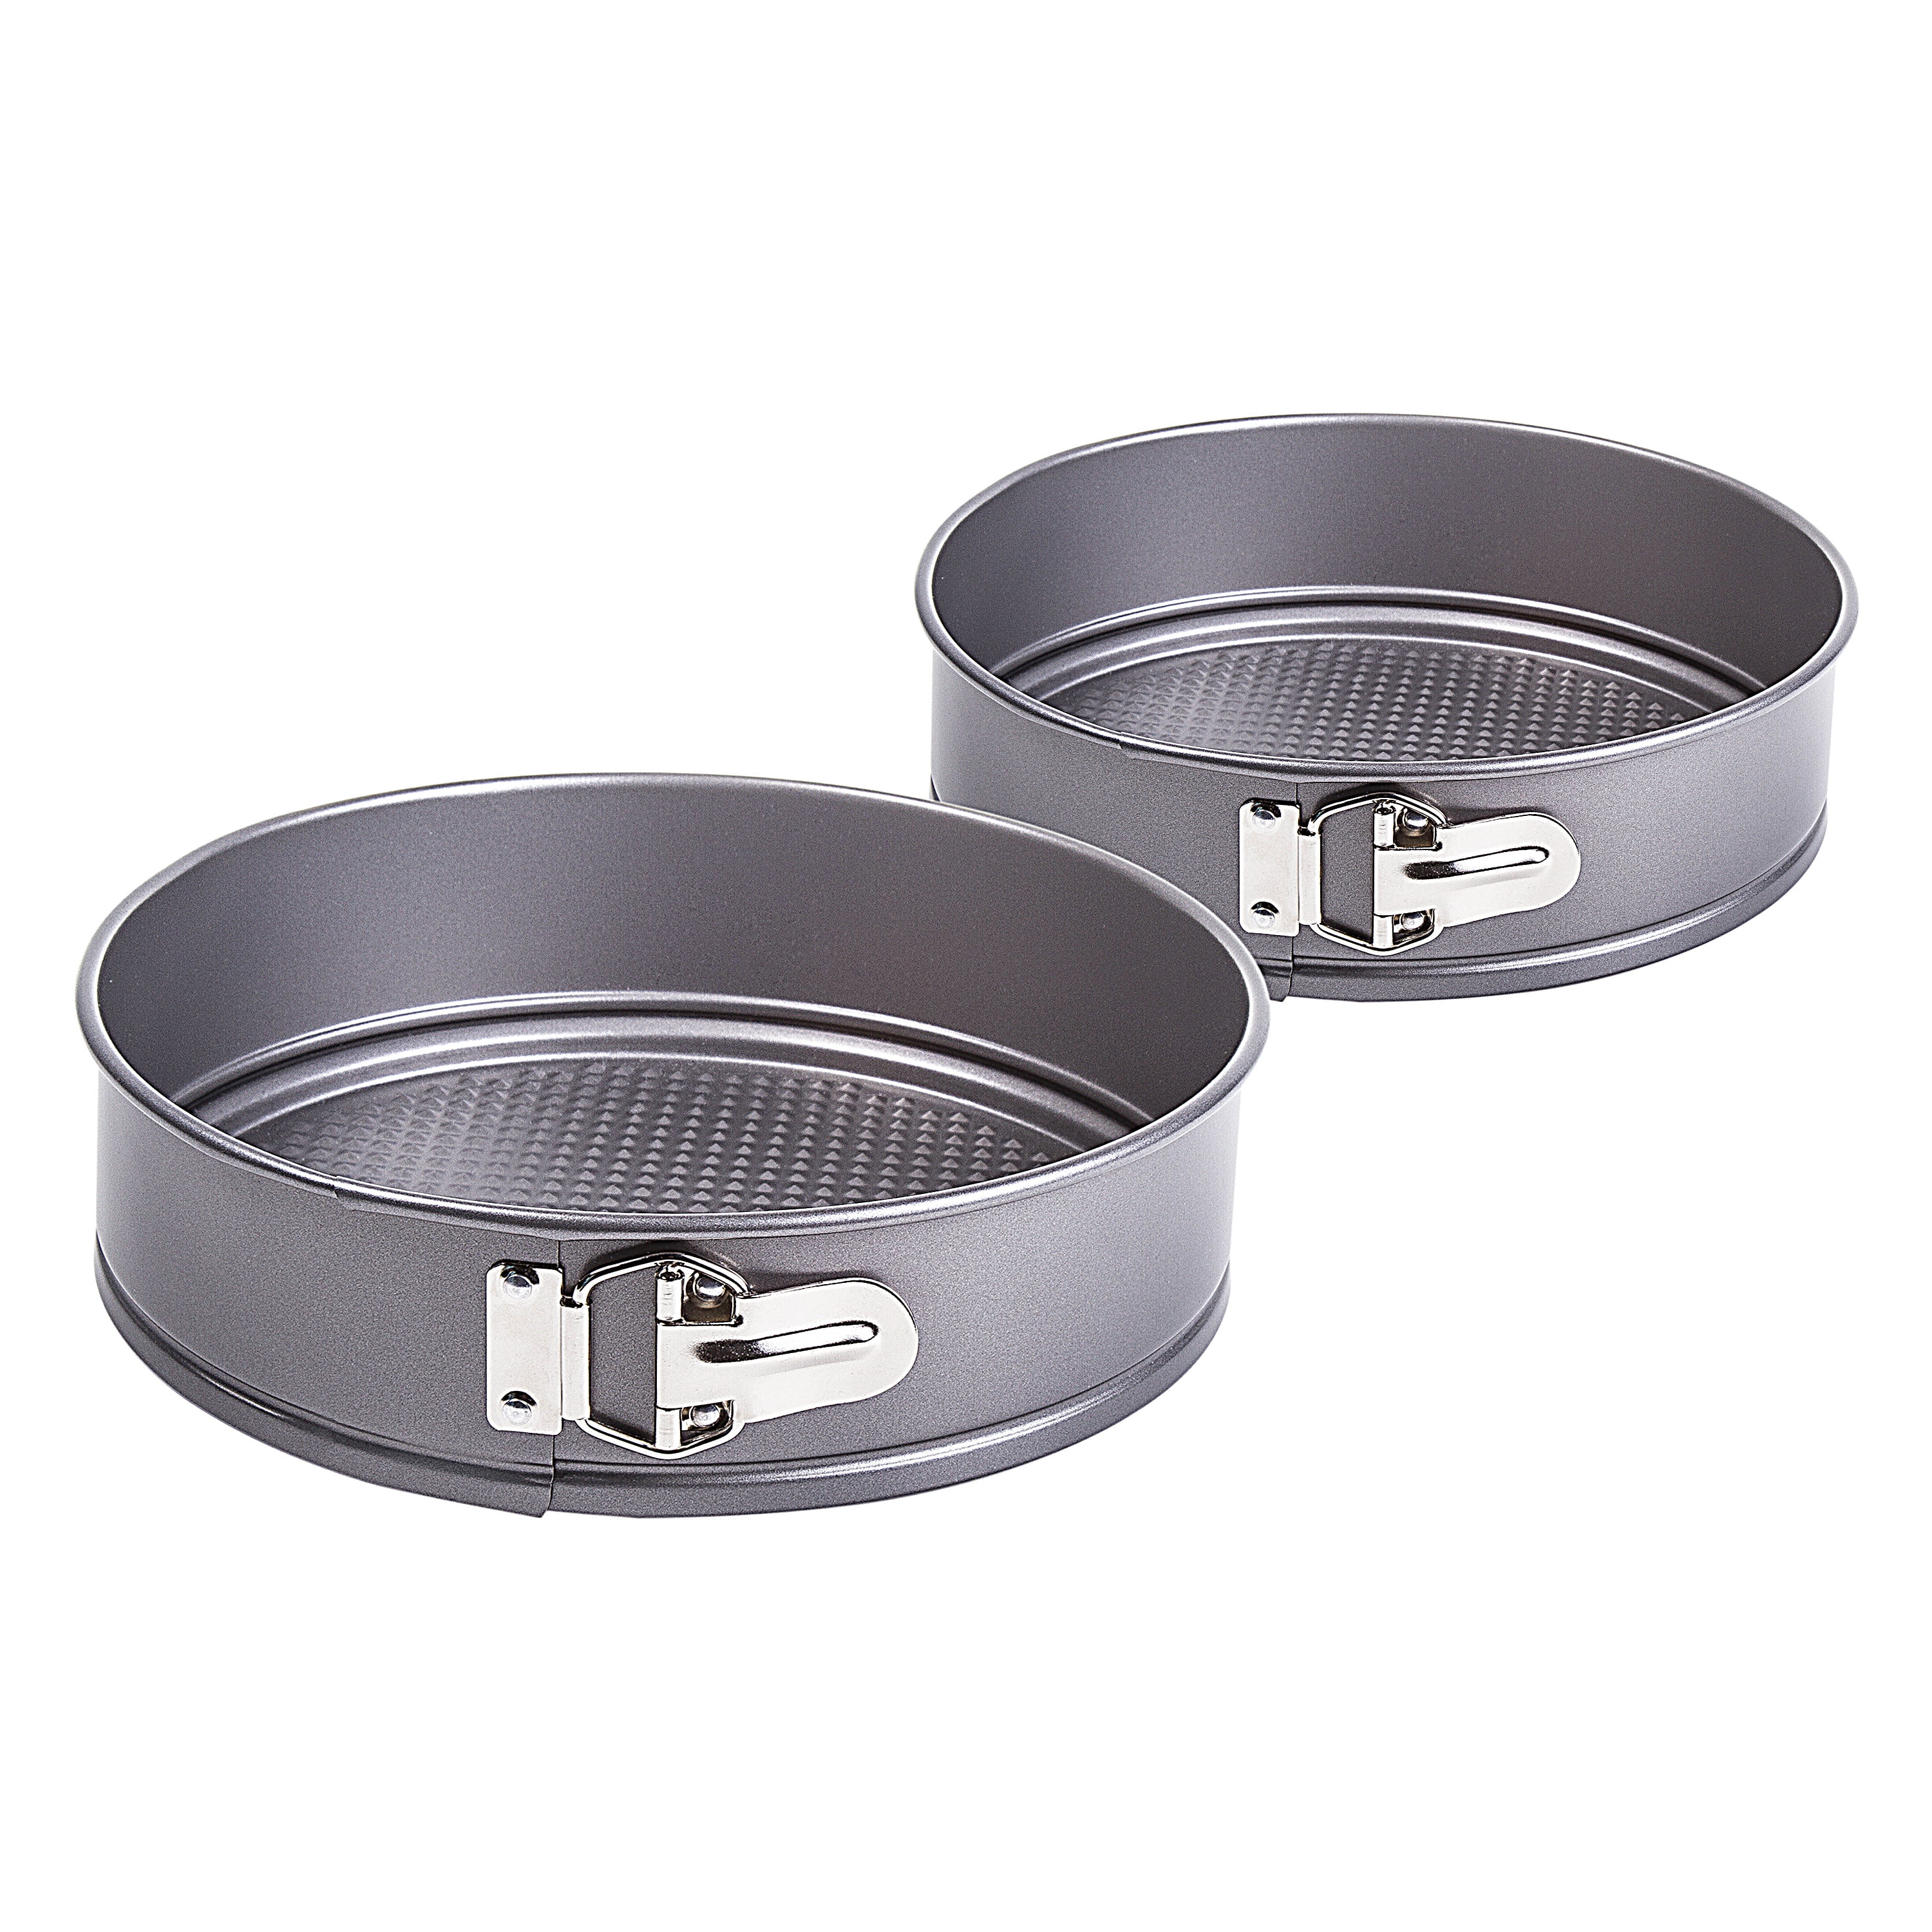 Tasty 10 Springform and Cheesecake Pan Non-Stick - Set of 2 